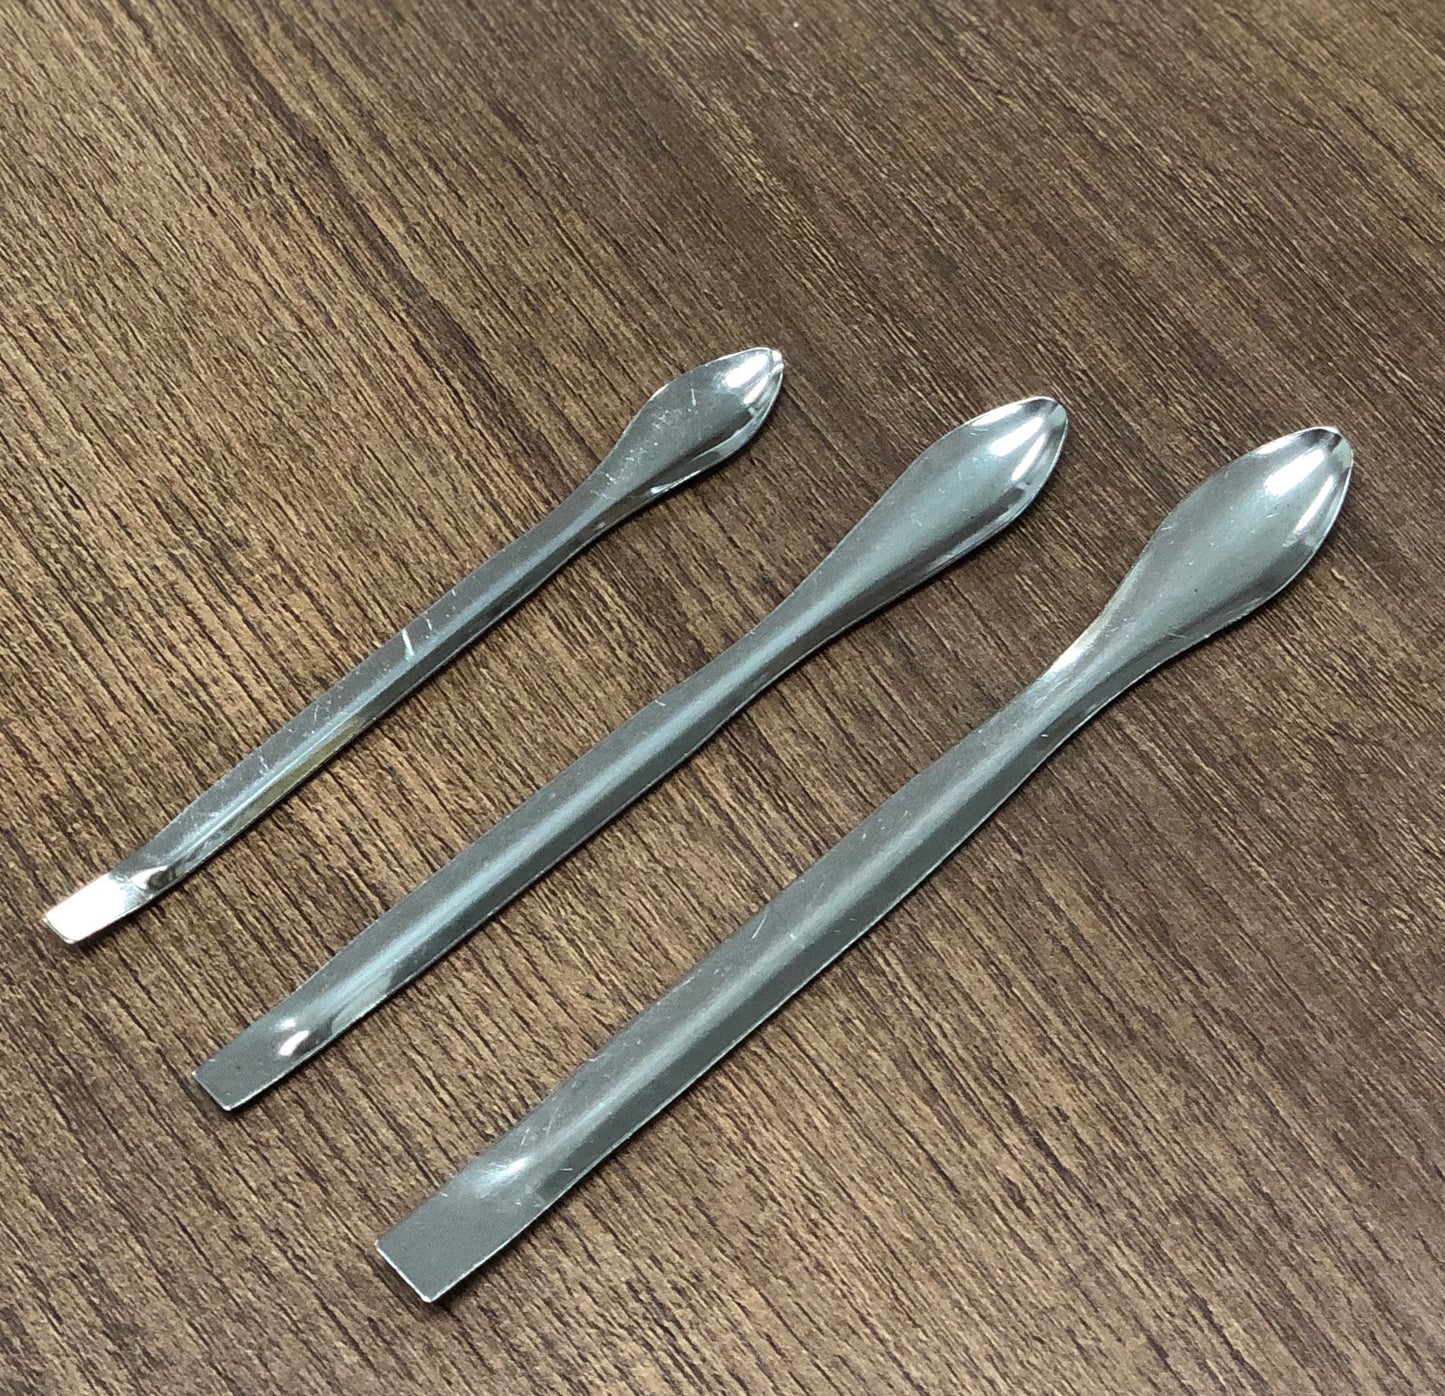 Stainless Steel Tip Shaped Spoons (3 packs) 不鏽鋼尖勺（三件） - Life Science Publishing & Products Hong Kong and Asia